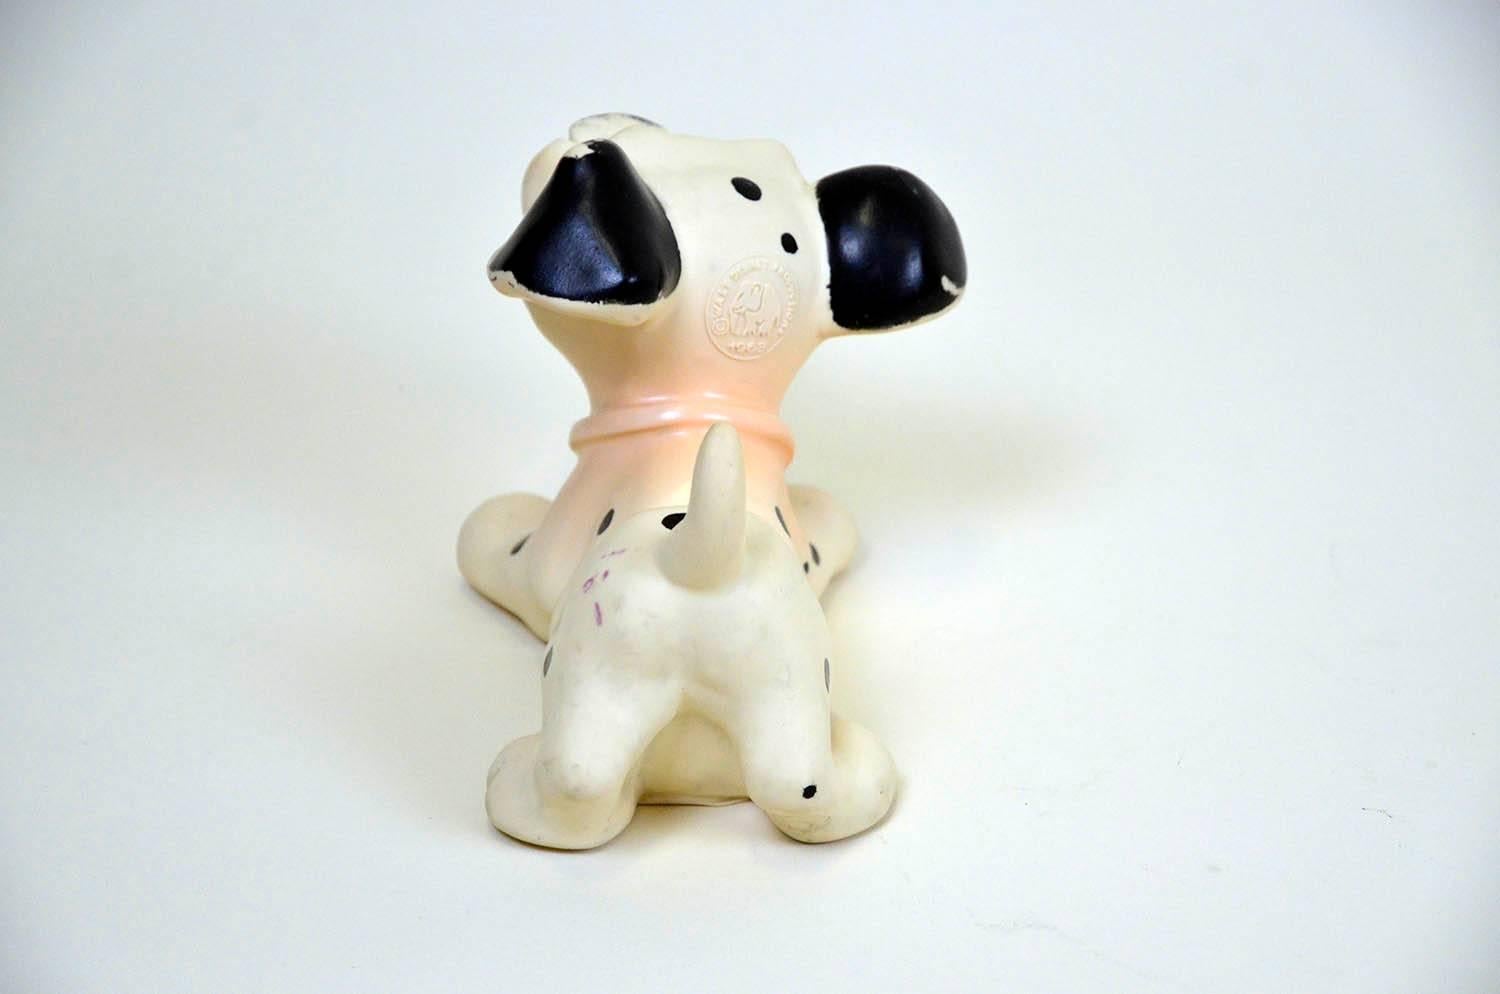 Mid-Century Modern 1960s Vintage Original Disney One Hundred and One Dalmatians Rubber Squeak Toy For Sale